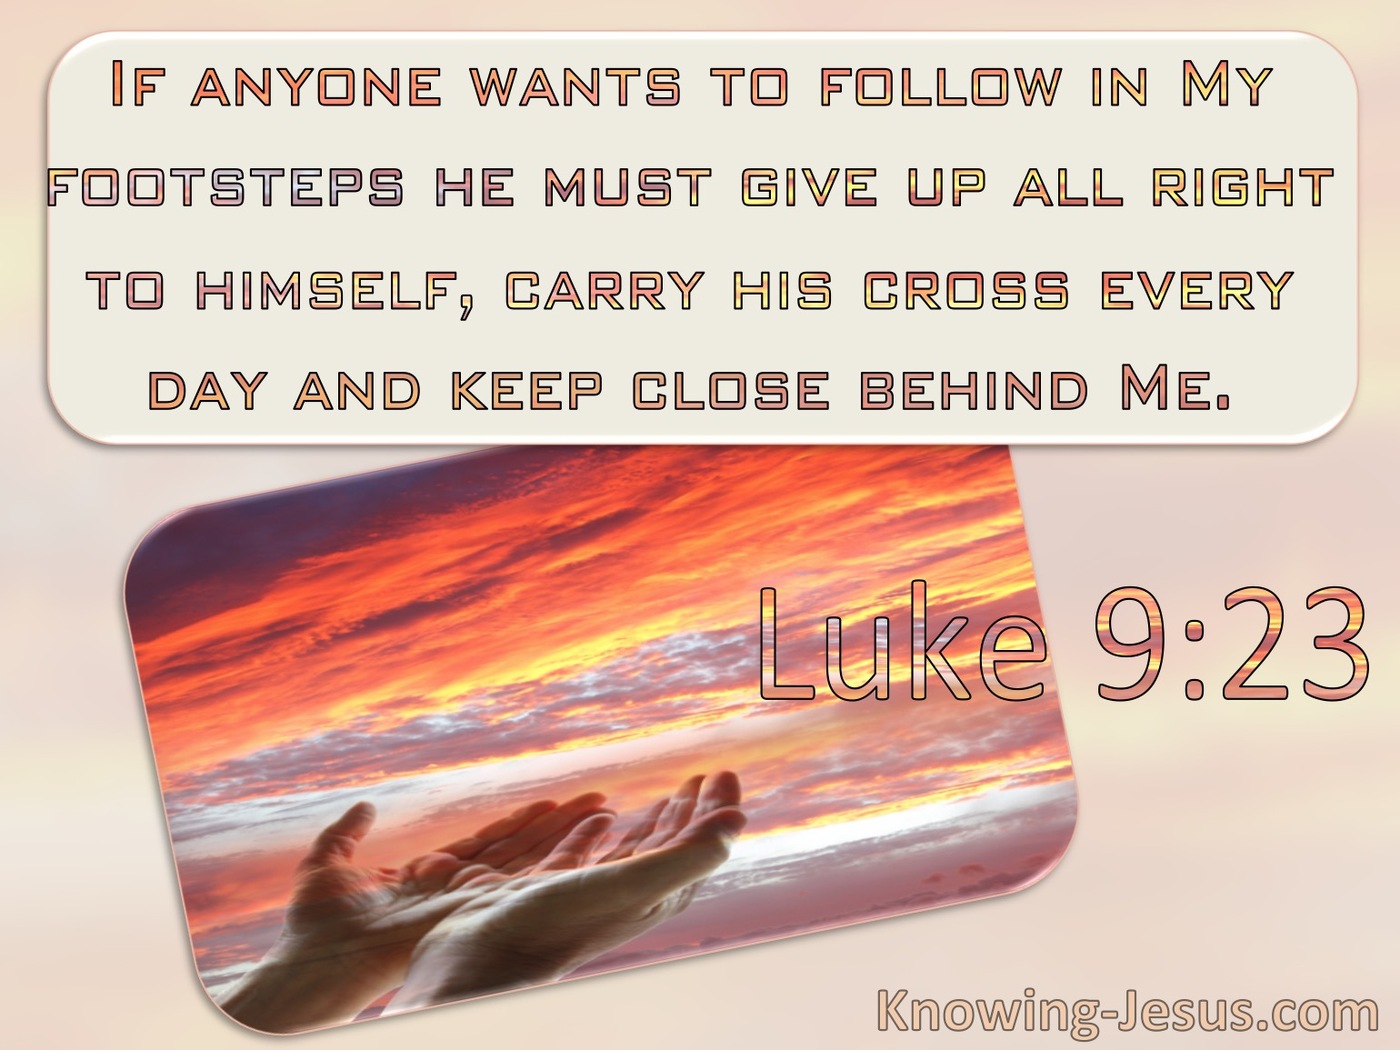 Luke 9:23 He Must Die To Self And Take Up His Cross And Follow Me (windows)11:28